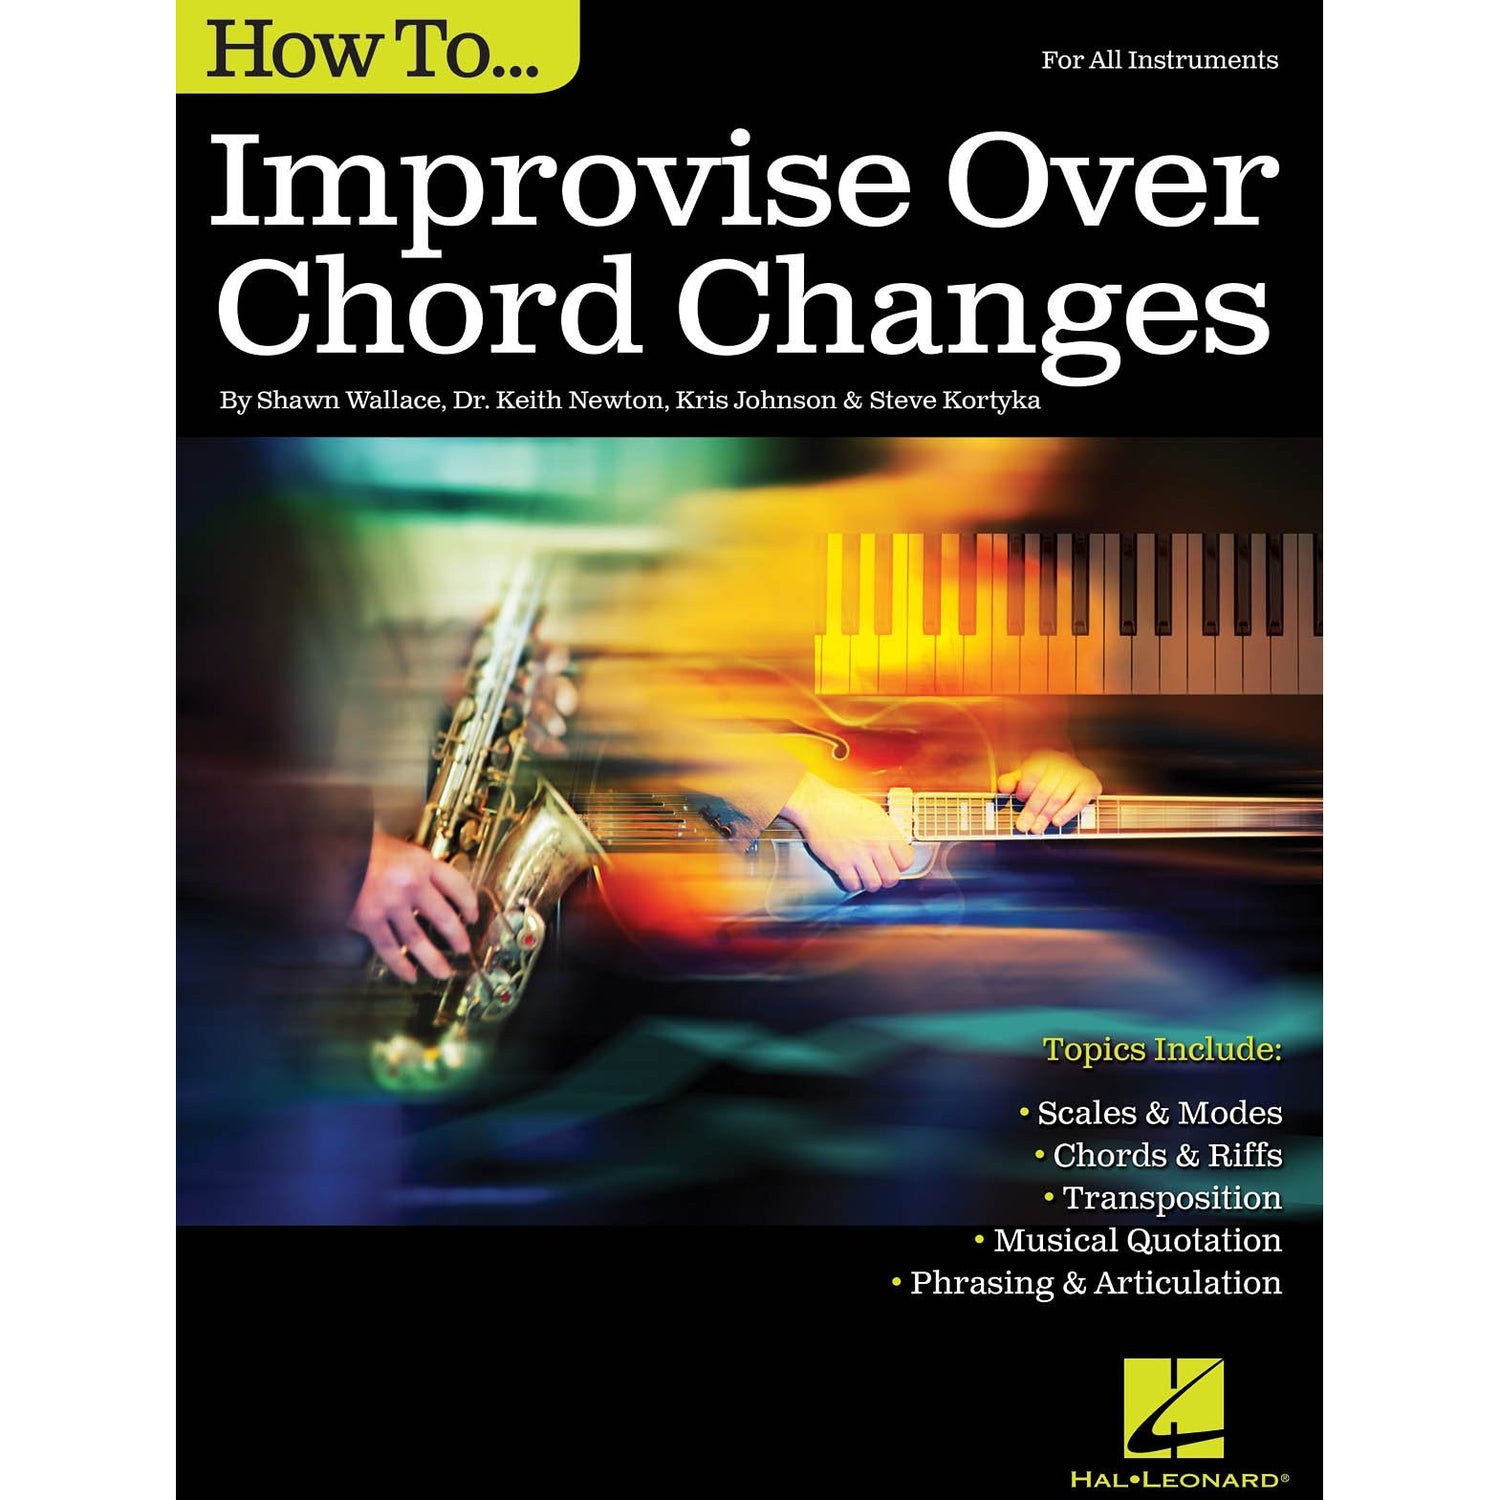 Image 1 of How to Improvise Over Chord Changes - For All Instruments - SKU# 49-138009 : Product Type Media : Elderly Instruments